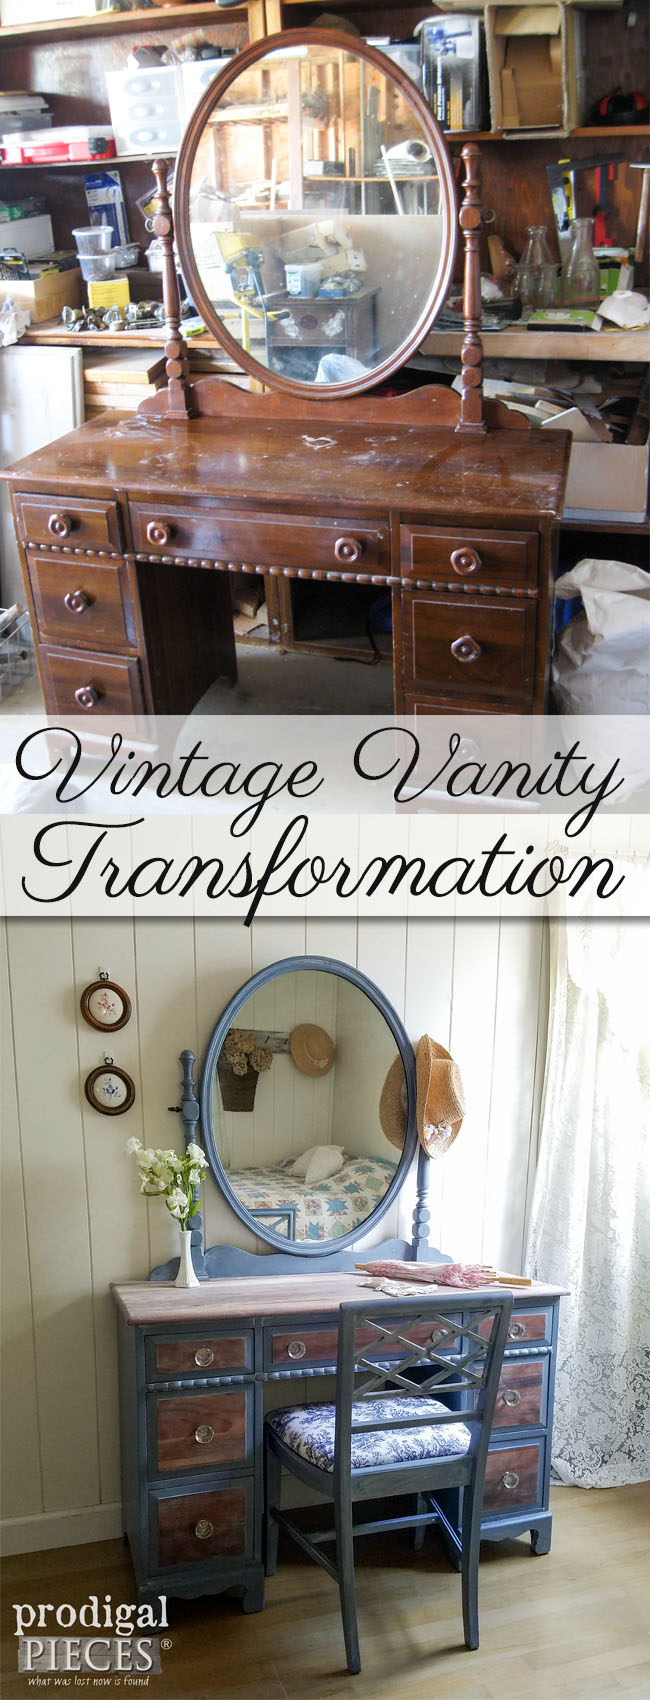 Vintage Kroehler Vanity Gets French Country Cottage Makeover by Prodigal Pieces | www.prodigalpieces.com